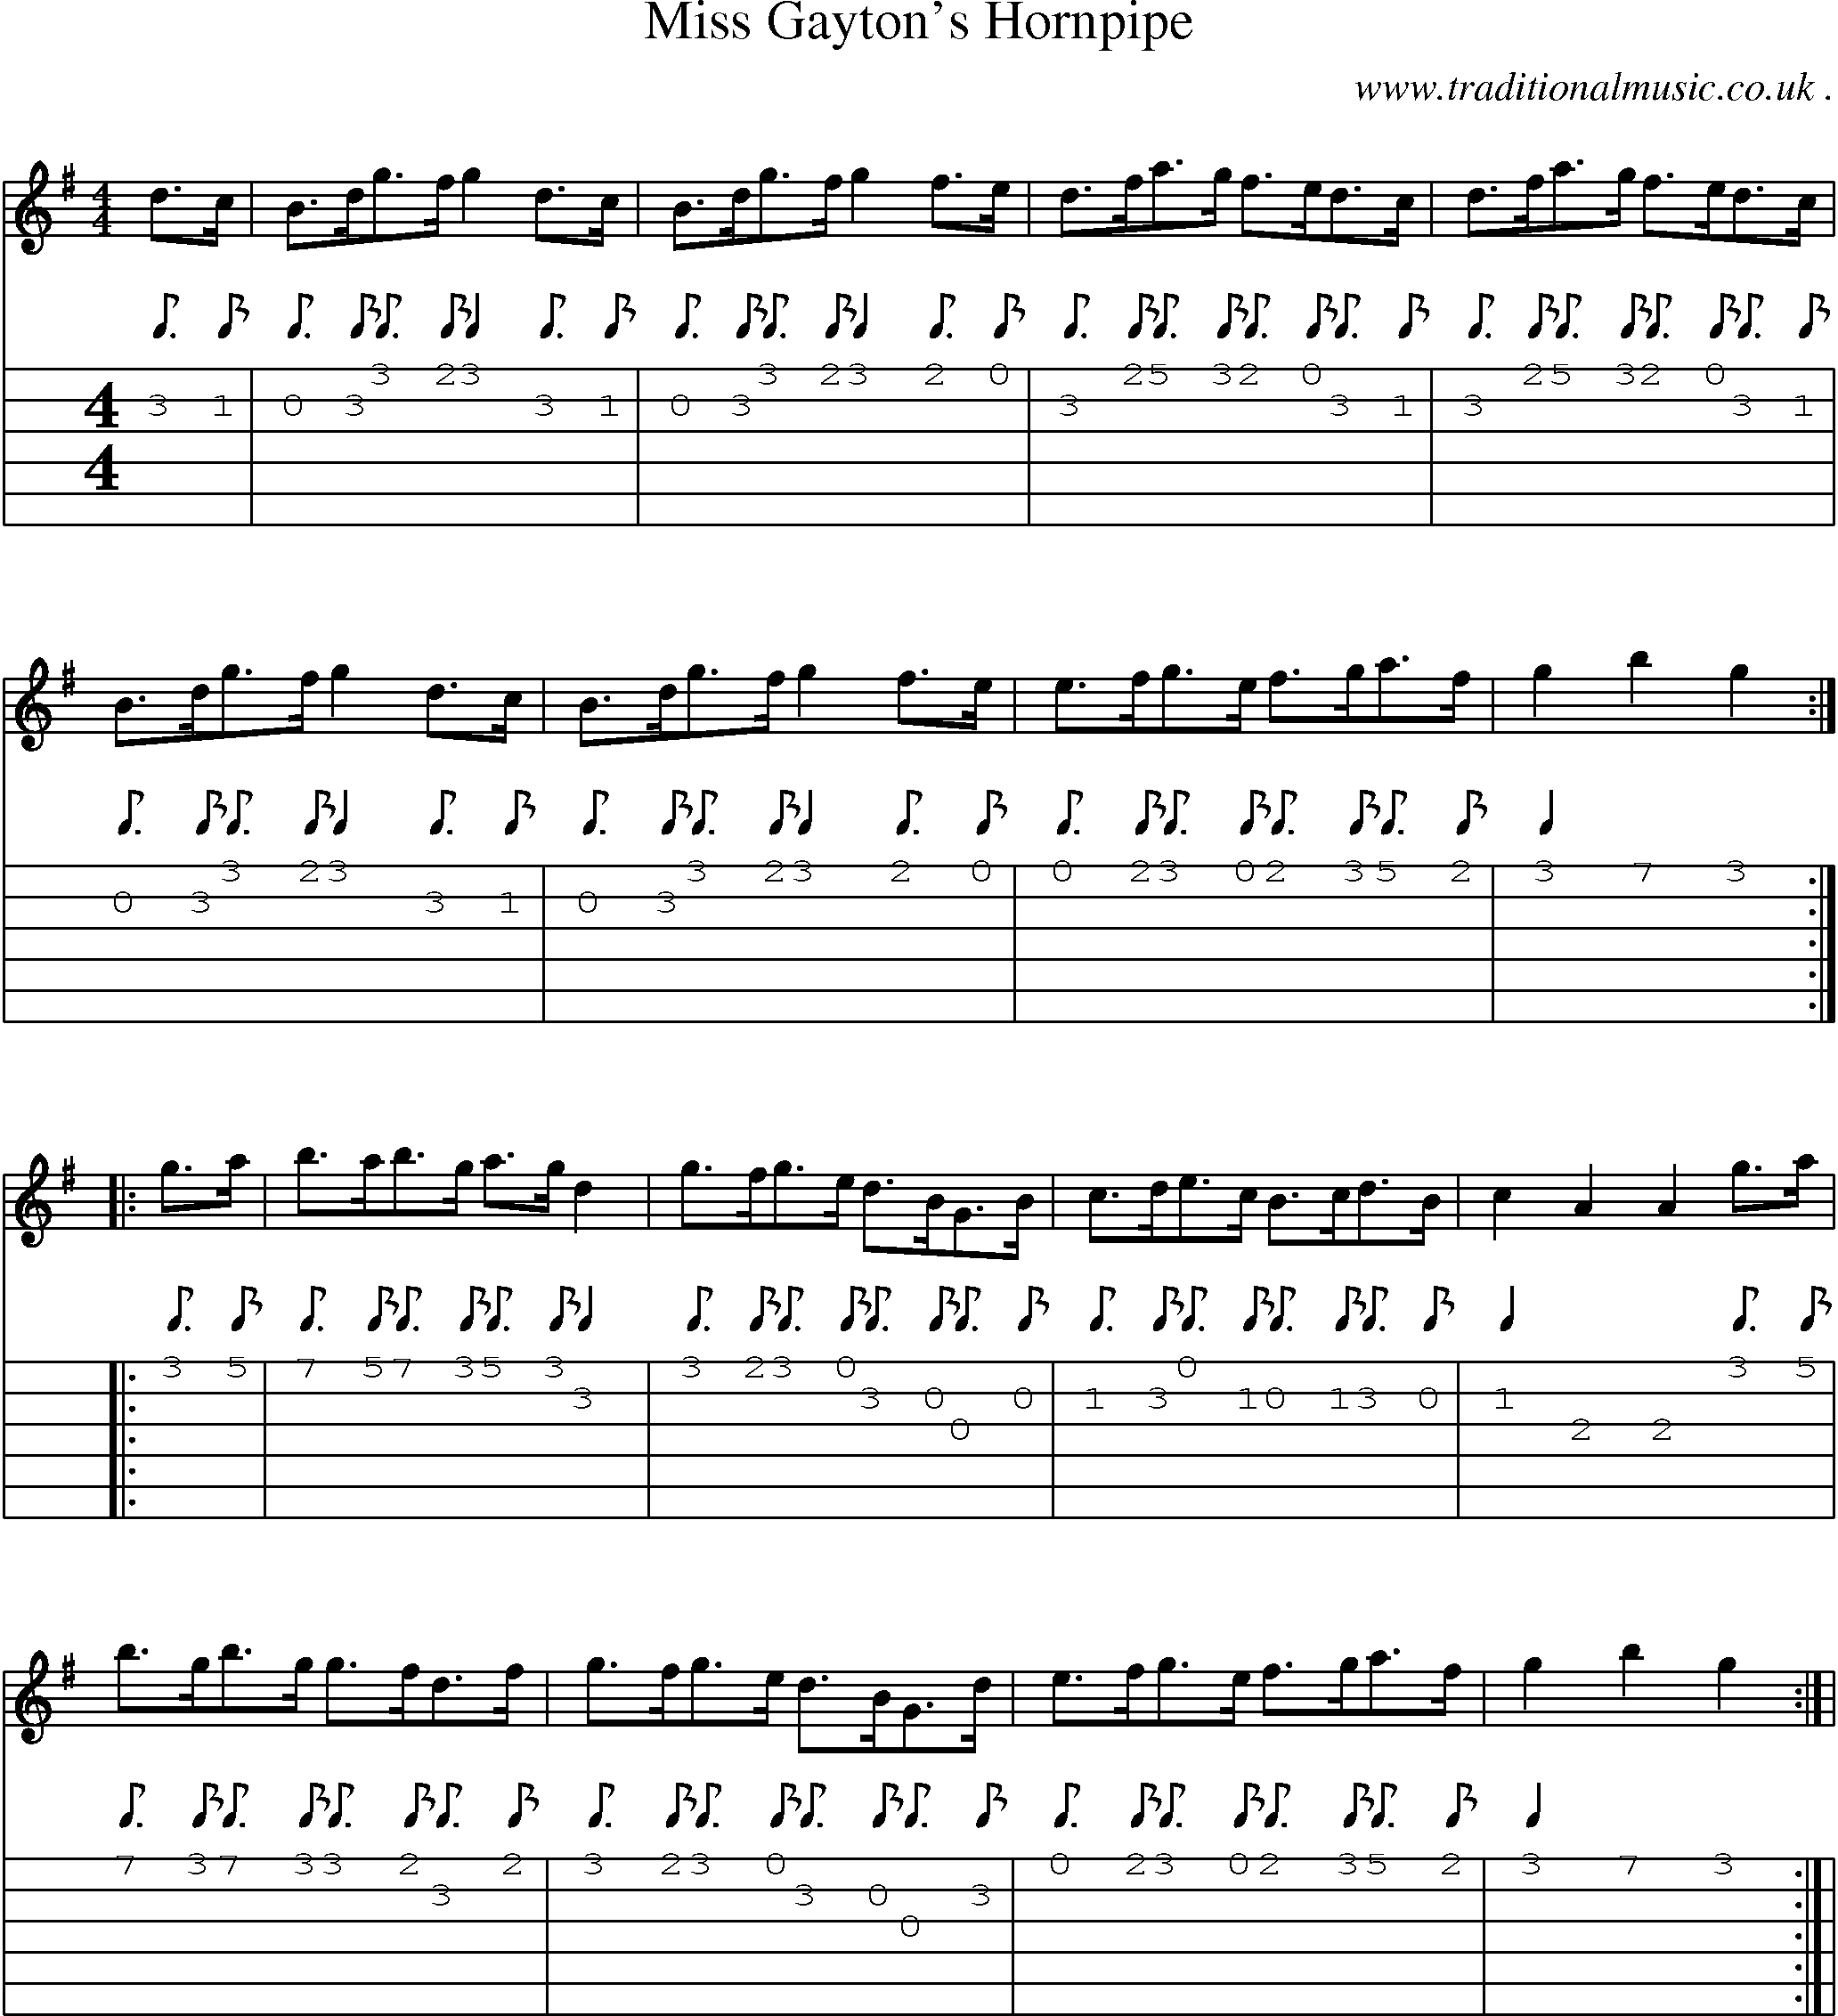 Sheet-Music and Guitar Tabs for Miss Gaytons Hornpipe